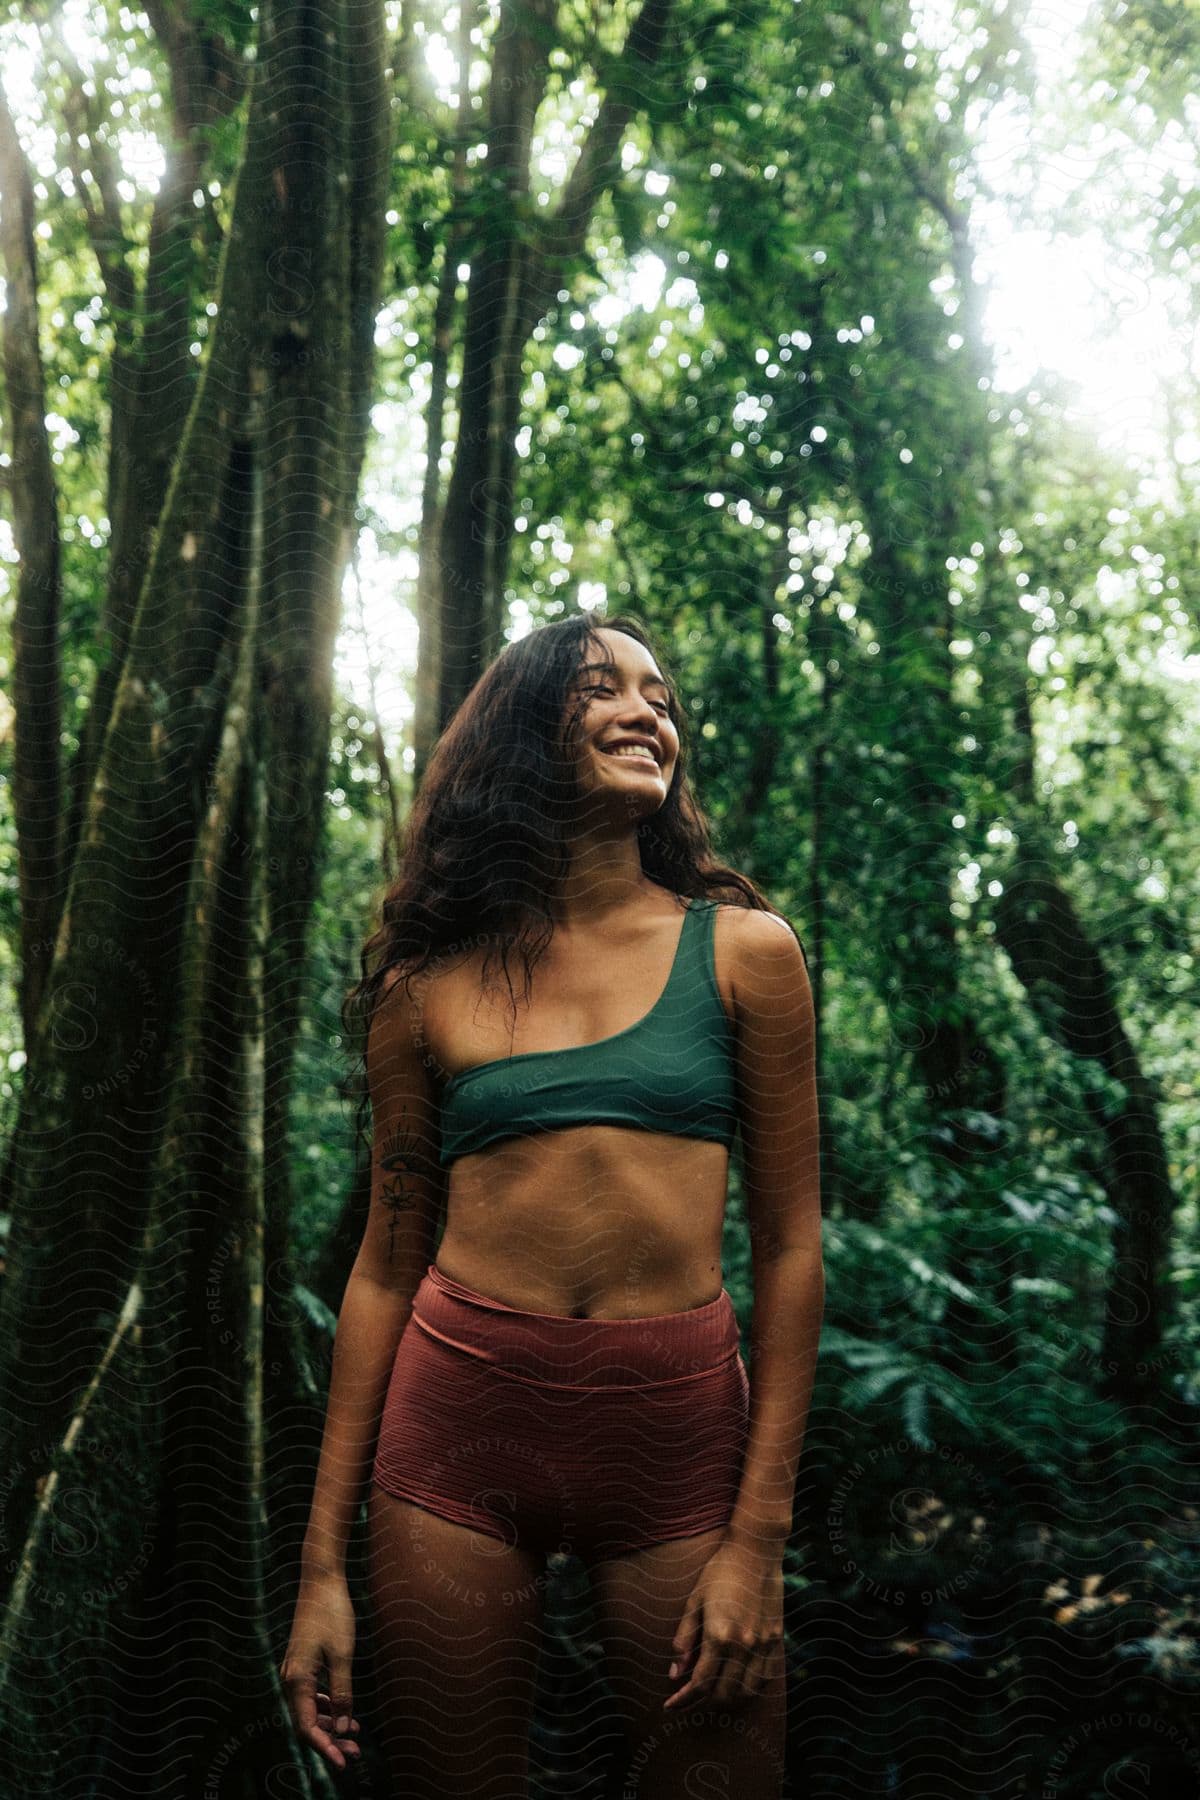 Woman smiling in rainforest with sunlight filtering through trees